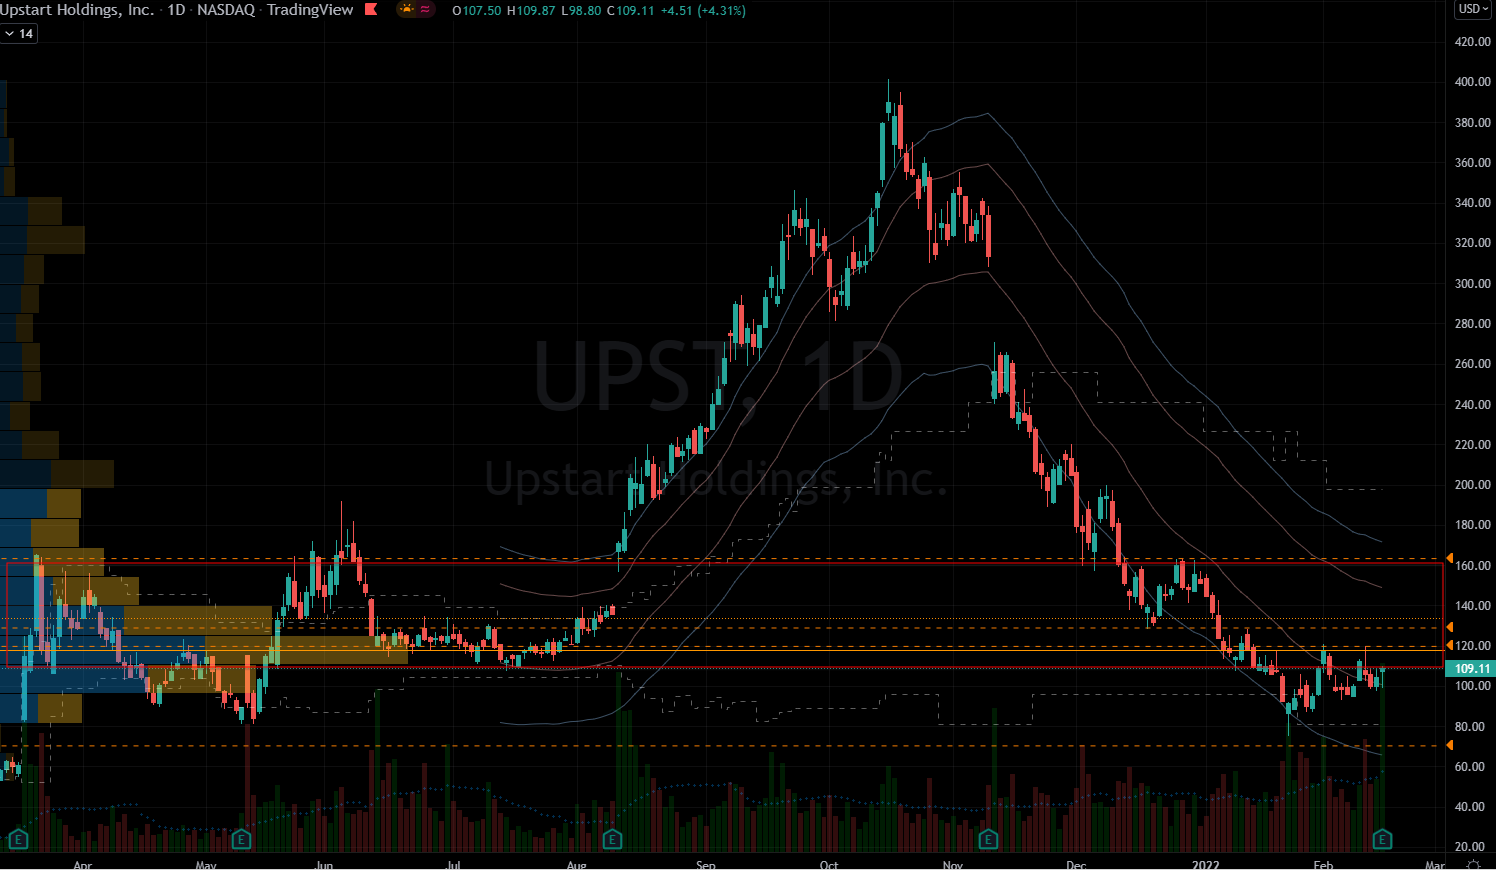 Upstart (UPST) Stock Chart Showing Zone of Contention